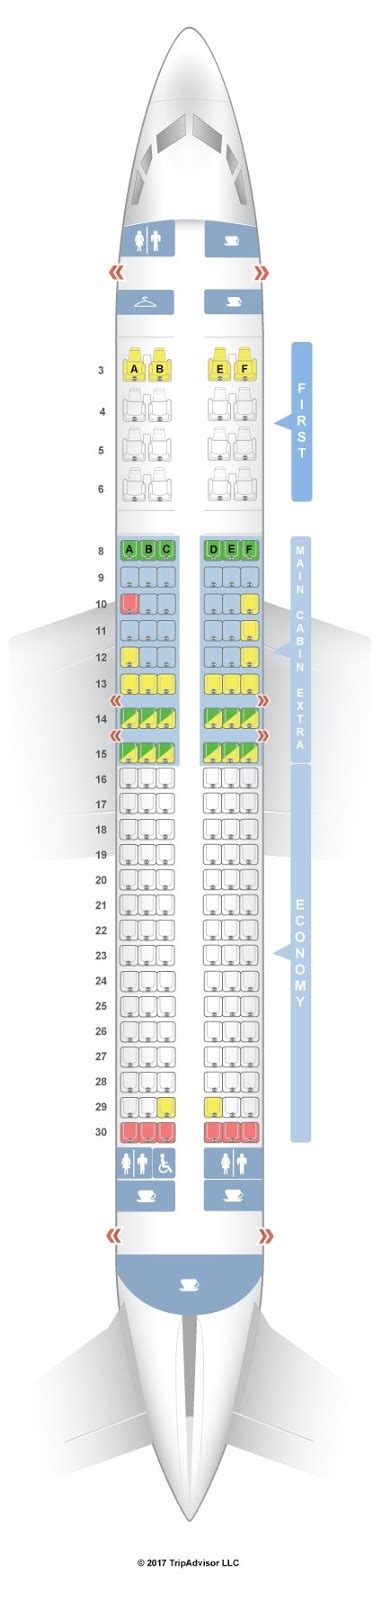 The first AA 172-seat Boeing 737-800 has just entered service, with 12 more seats than the other 737-800s in the fleet. . 737800 seat map american